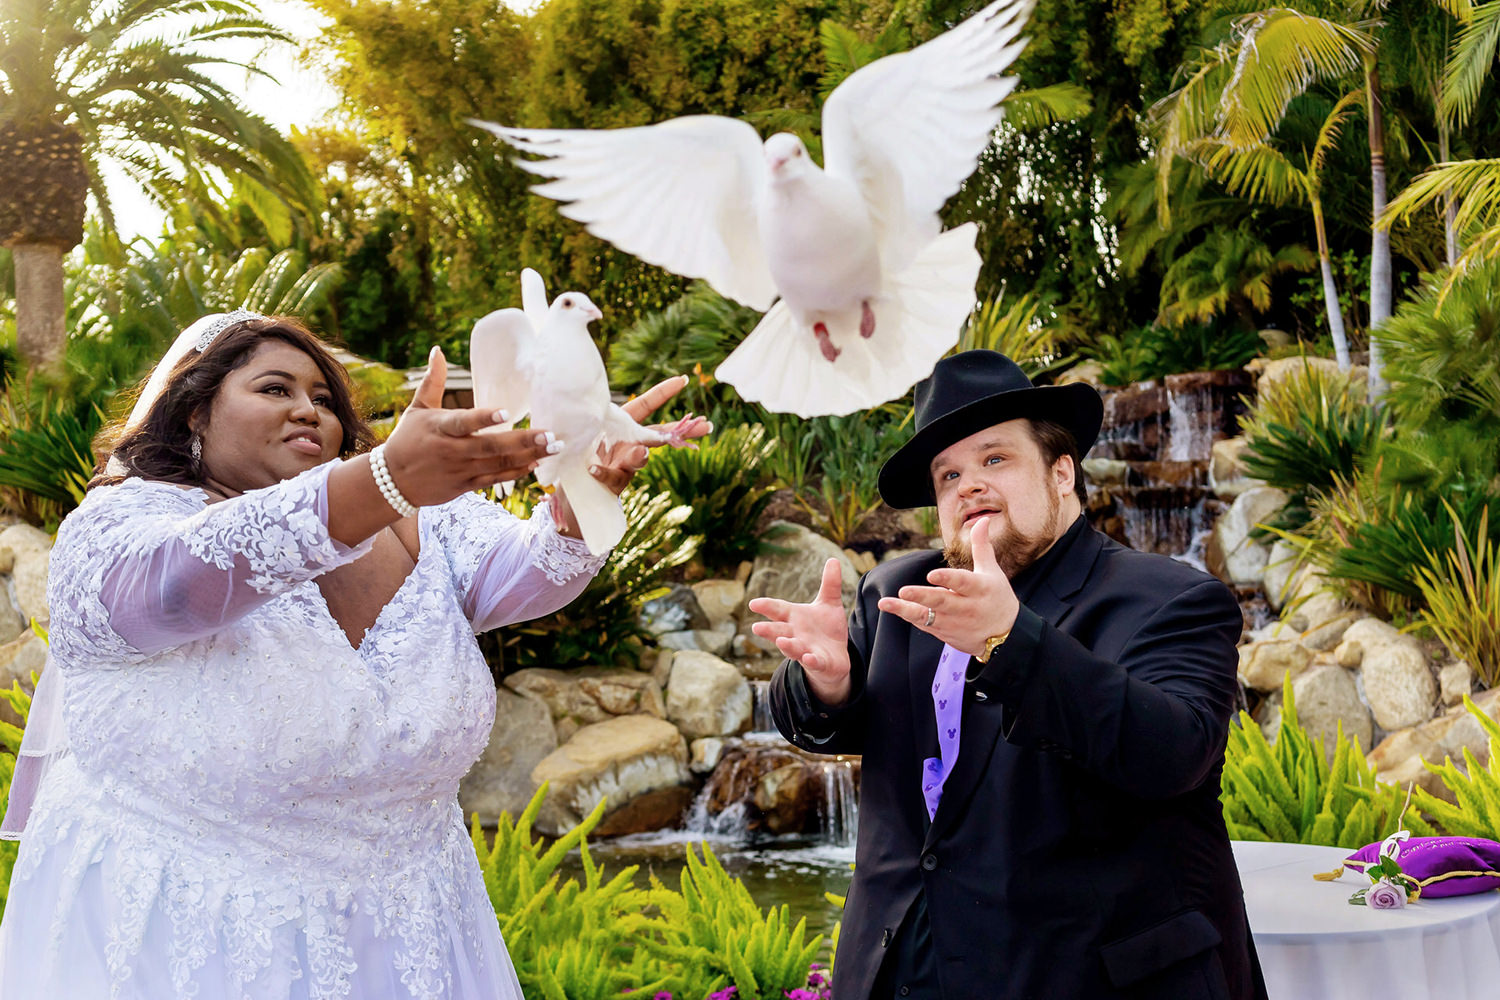 The bride and groom let the doves fly during their wedding ceremony.